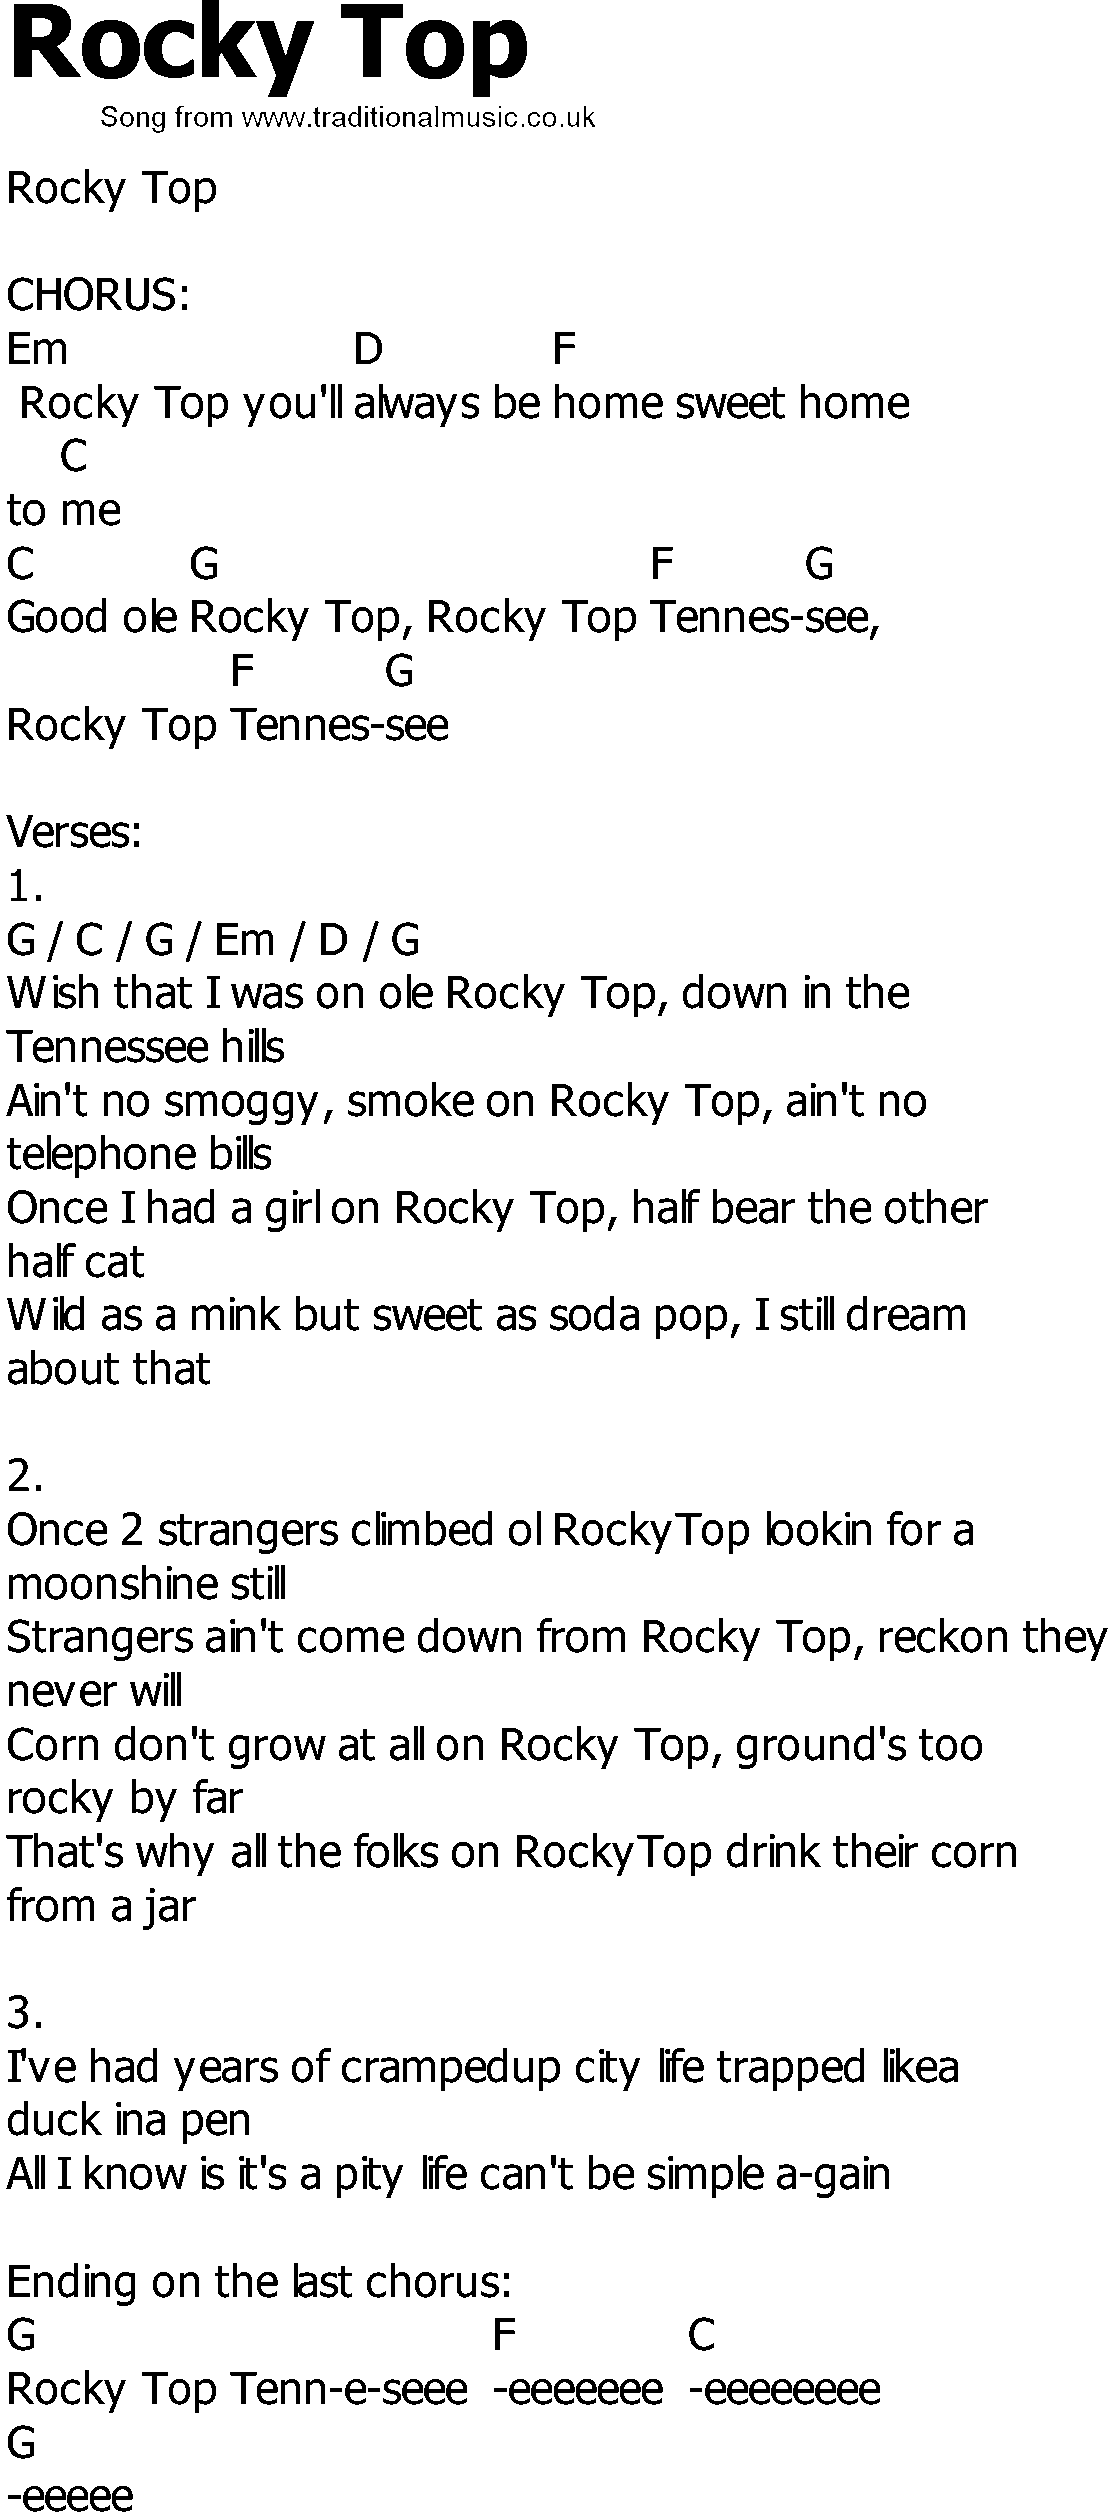 Old Country song lyrics with chords - Rocky Top